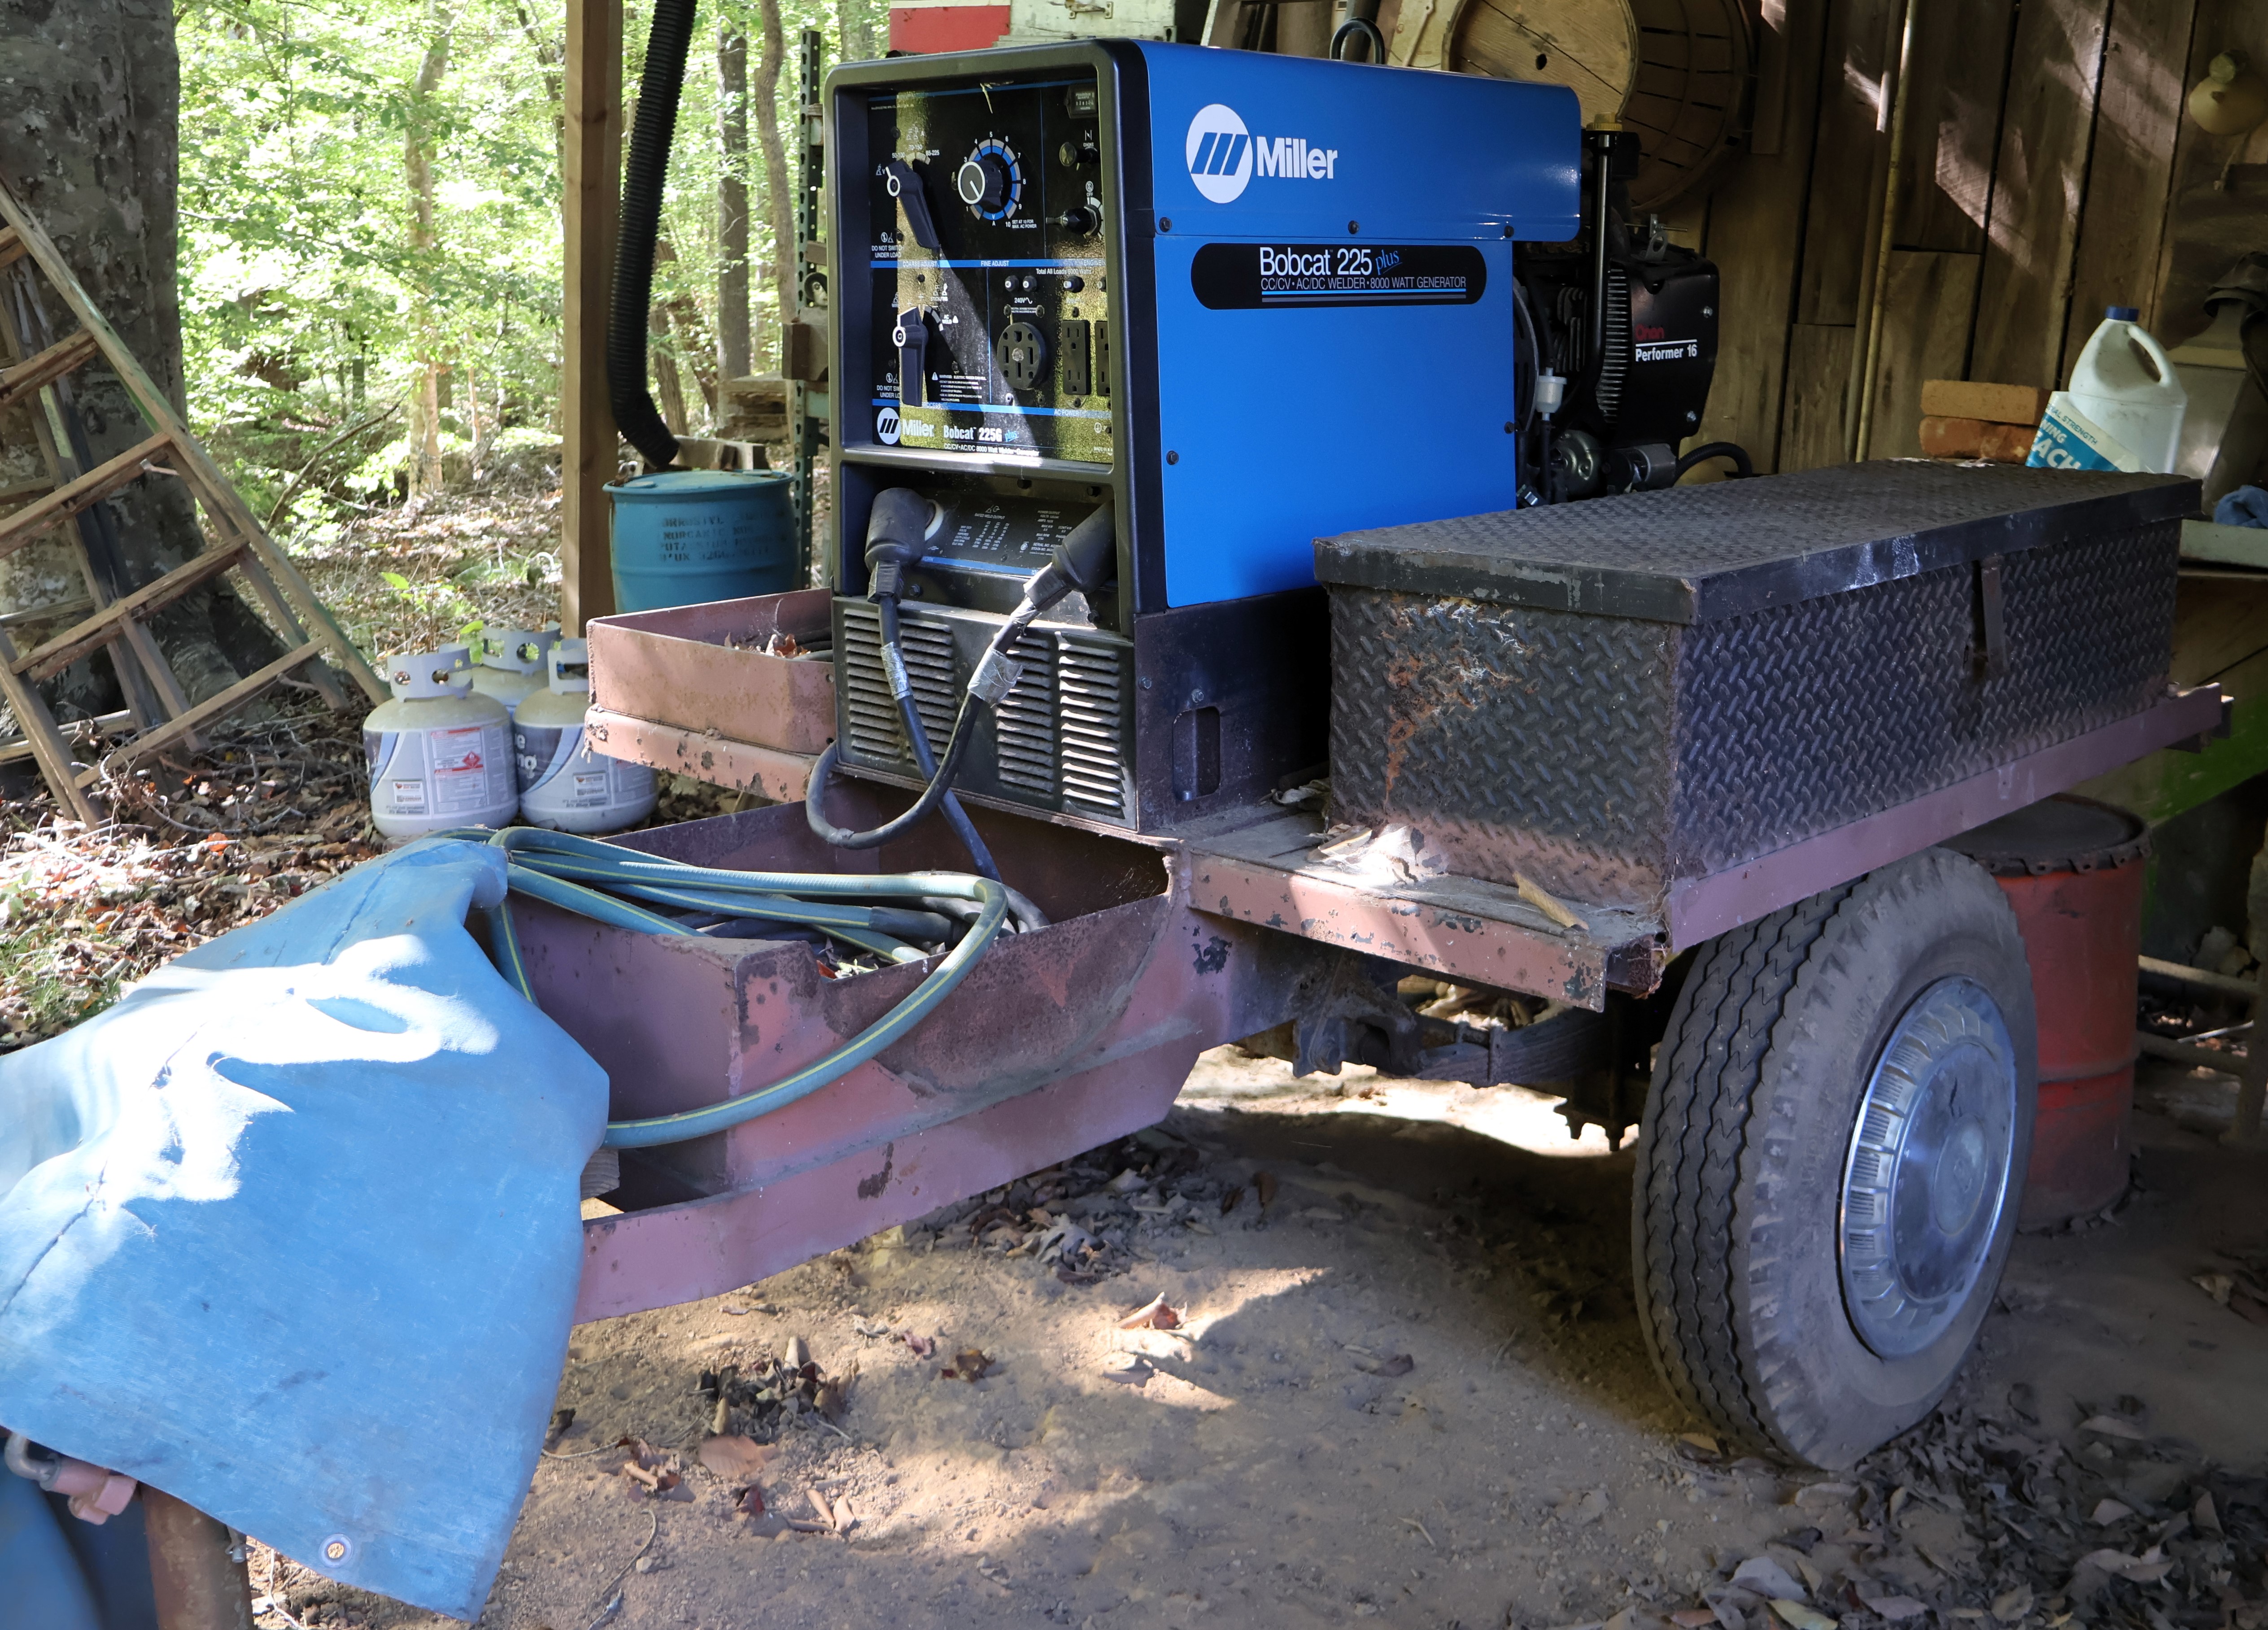 Sat. March 2nd 1:00pm - Tools, Tractor, and Equipment Auction - Pickup in Whitsett, NC